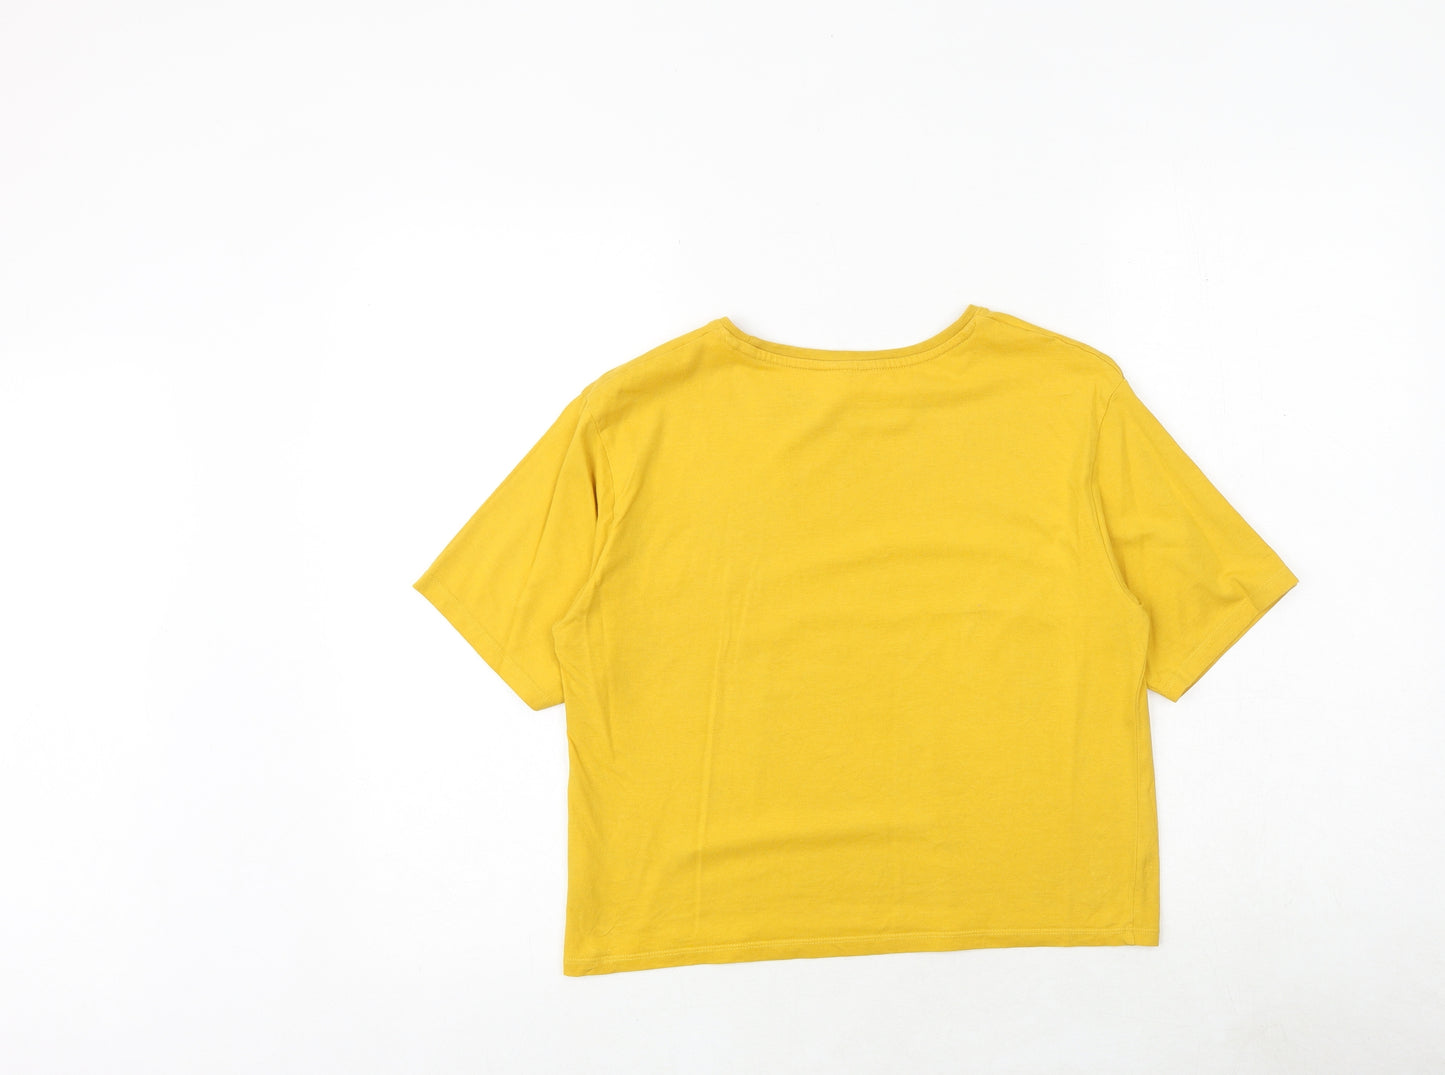 Candy Couture Girls Yellow 100% Cotton Pullover T-Shirt Size 15 Years Boat Neck Pullover - More Love